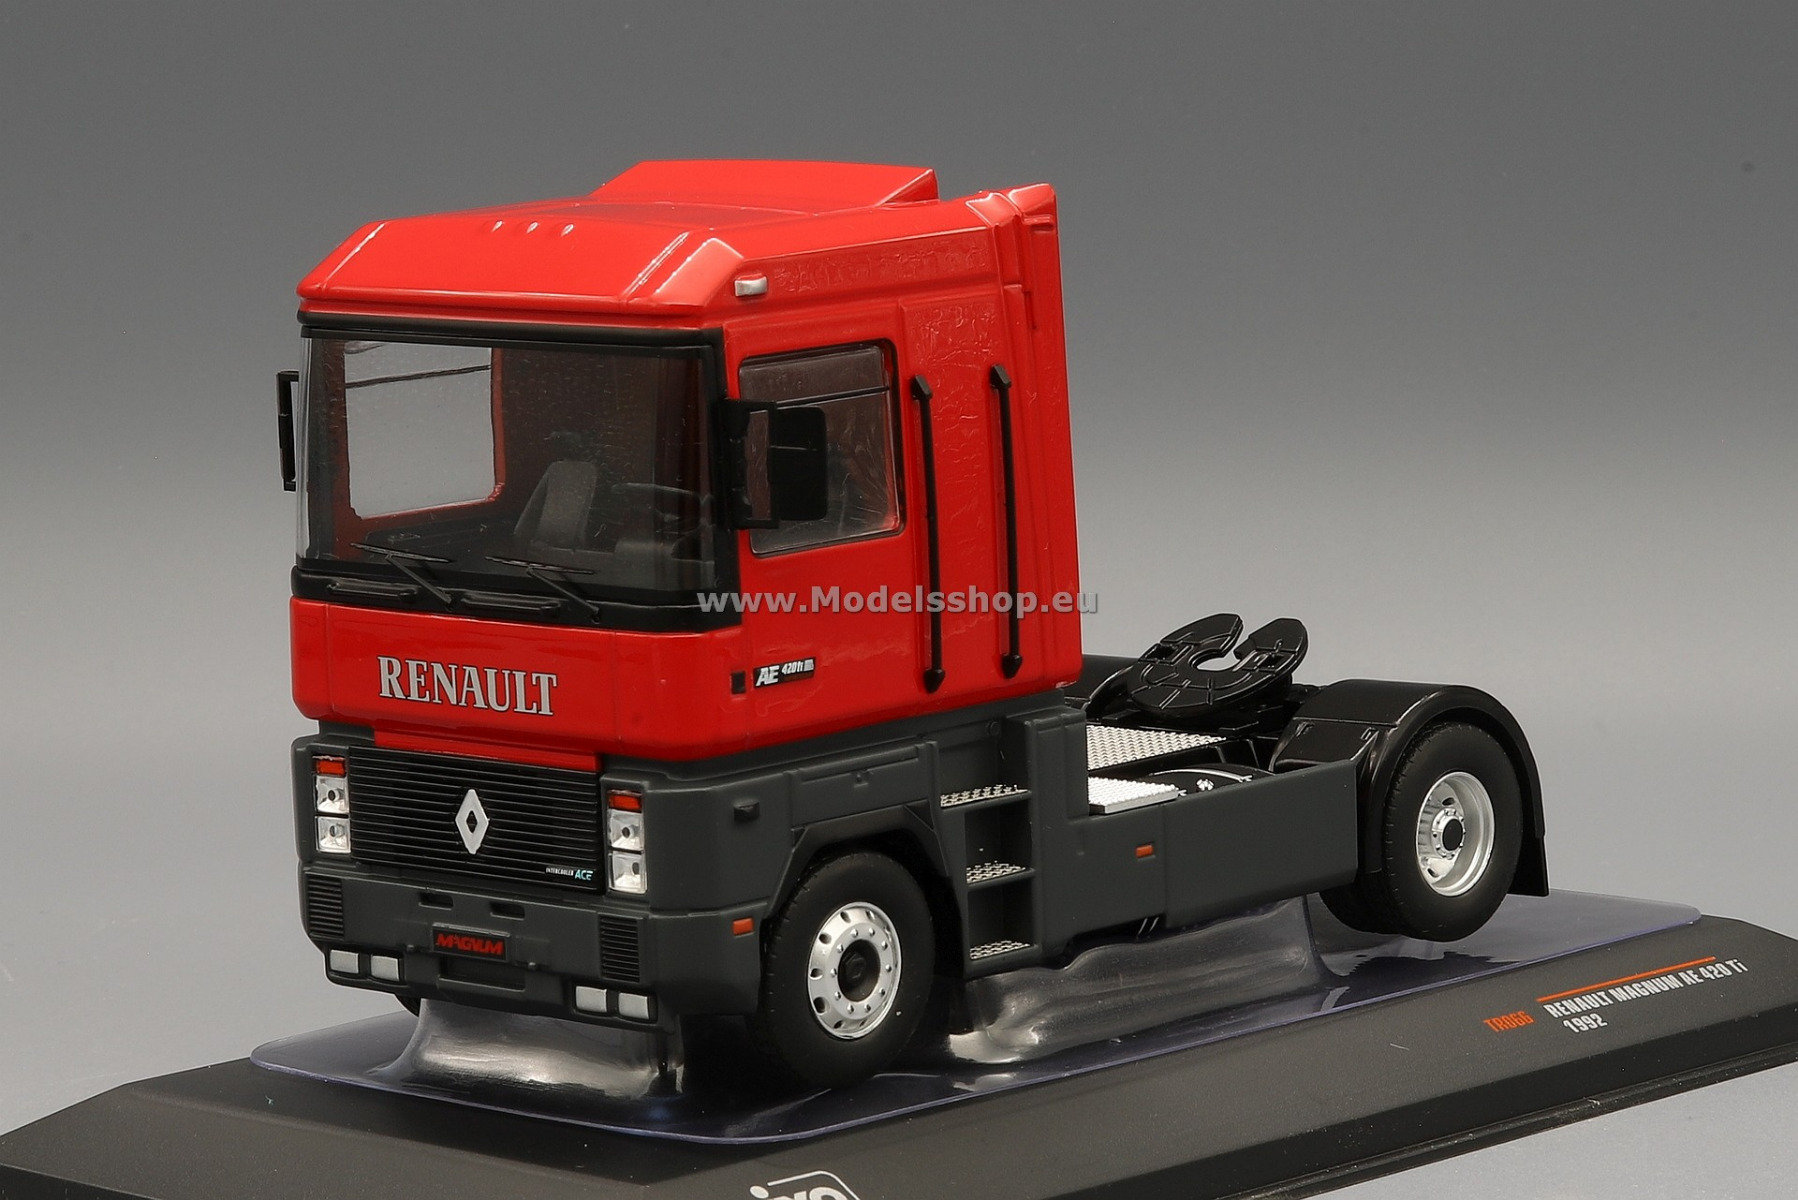 Renault Magnum AE 420 ti tractor truck, 1992 /red/